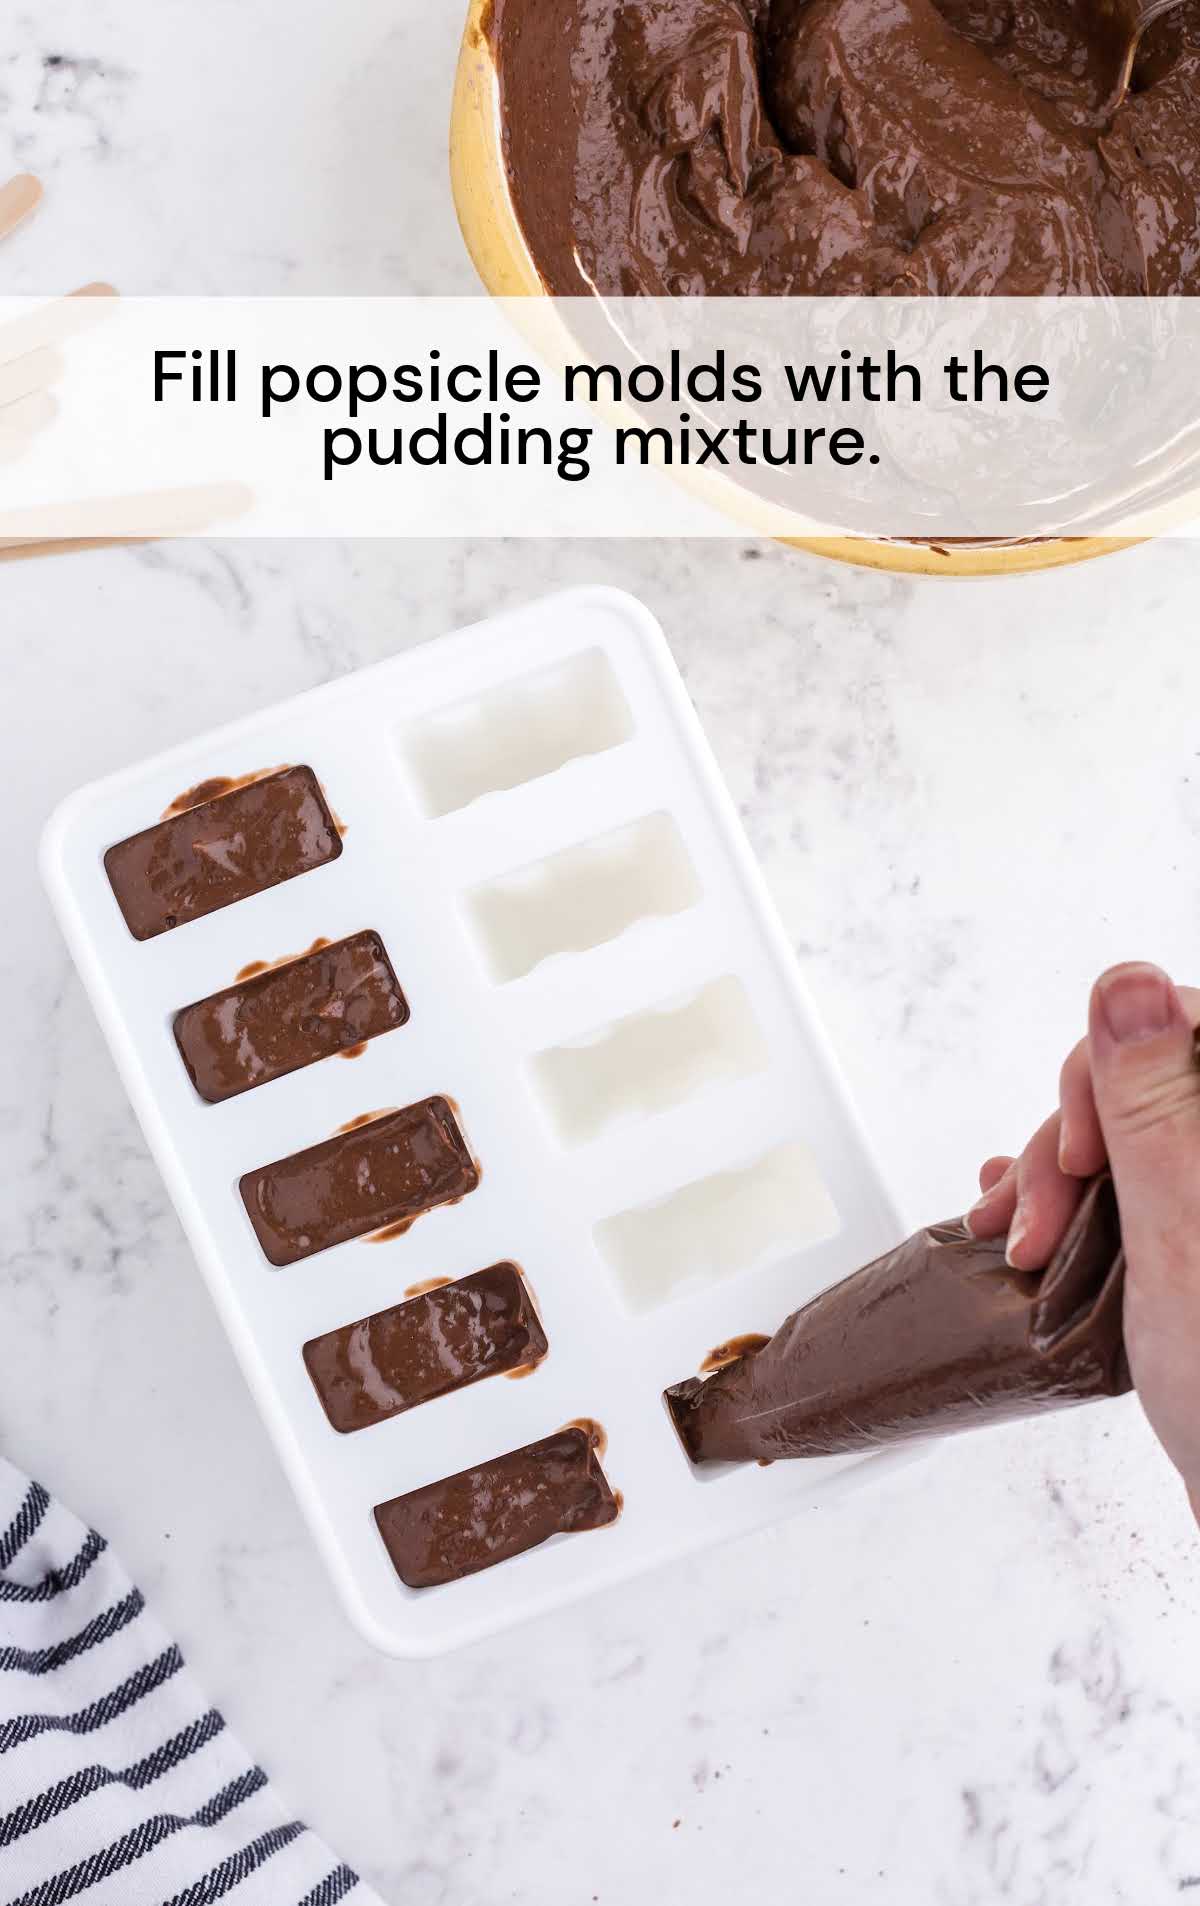 popsicle molds filled with pudding mixture